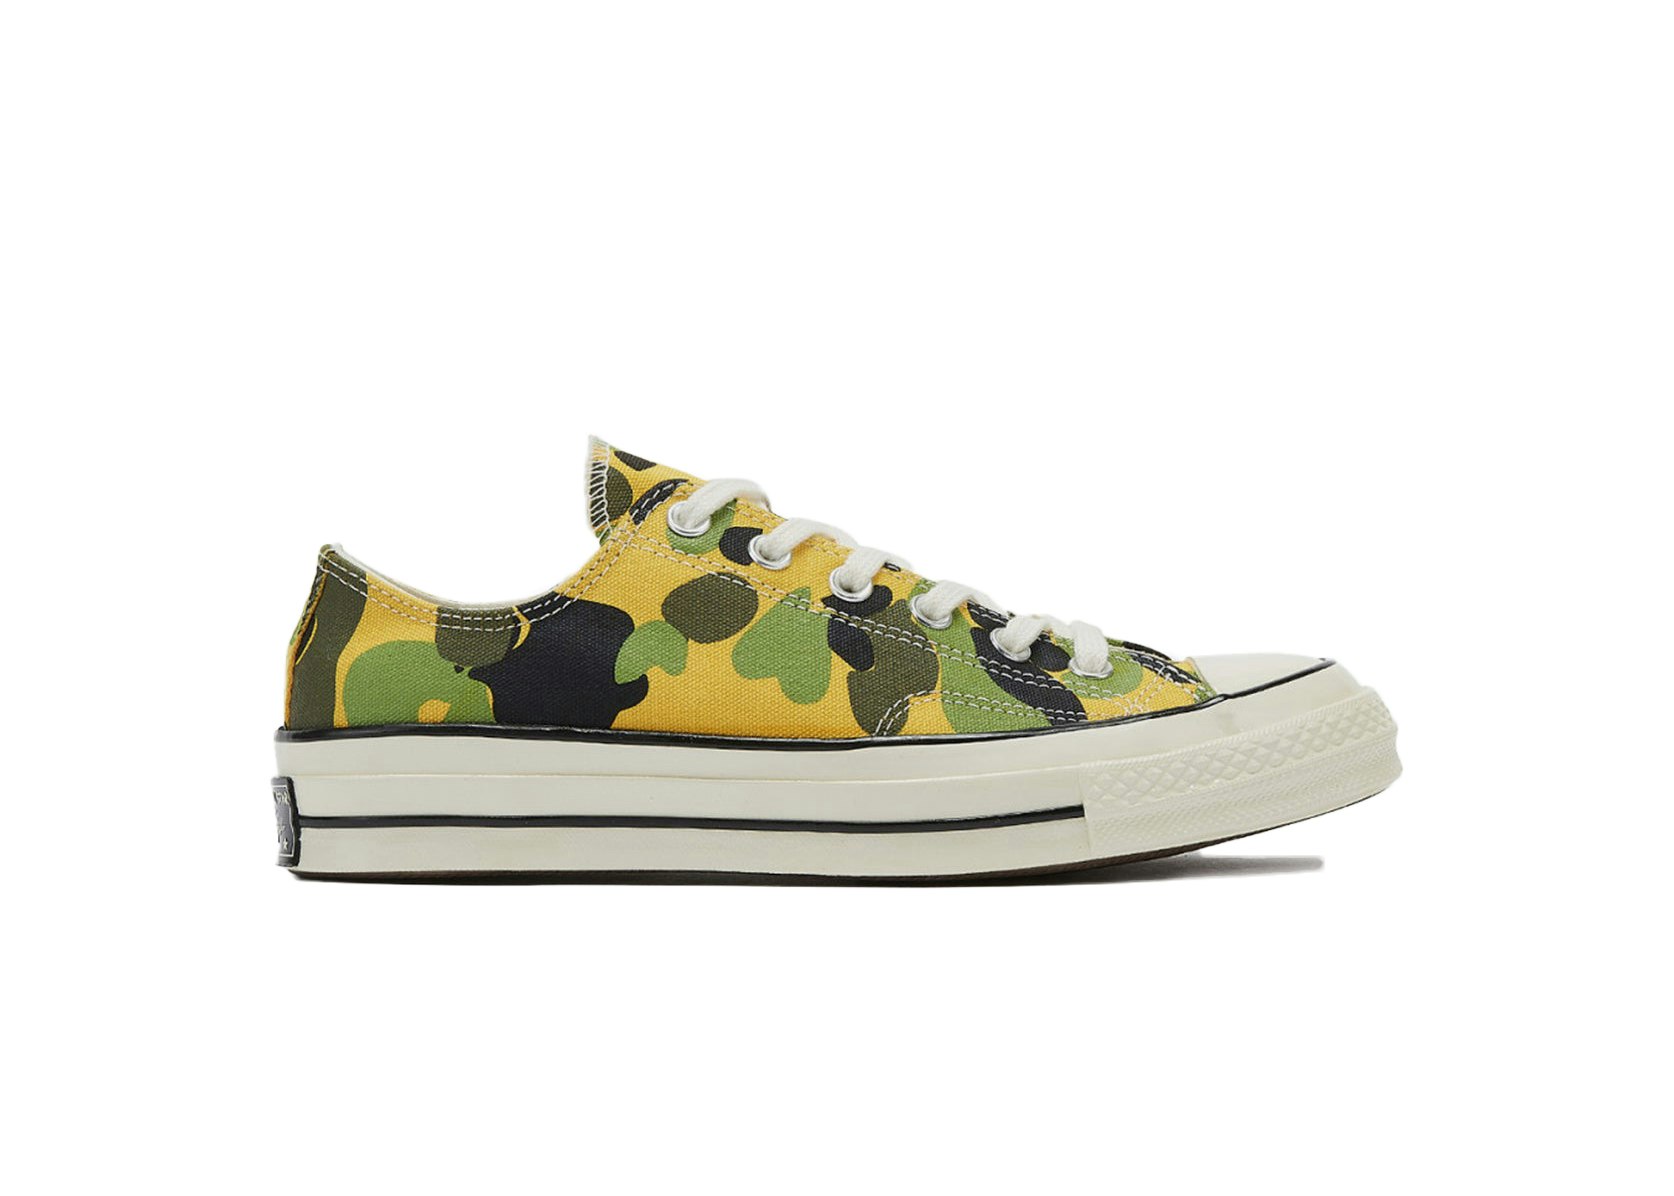 Converse Toddlers/Infants 1V Ox Low Trainers Shoes in Camo UK  2,3,4,5,6,7,8,9,10 | eBay